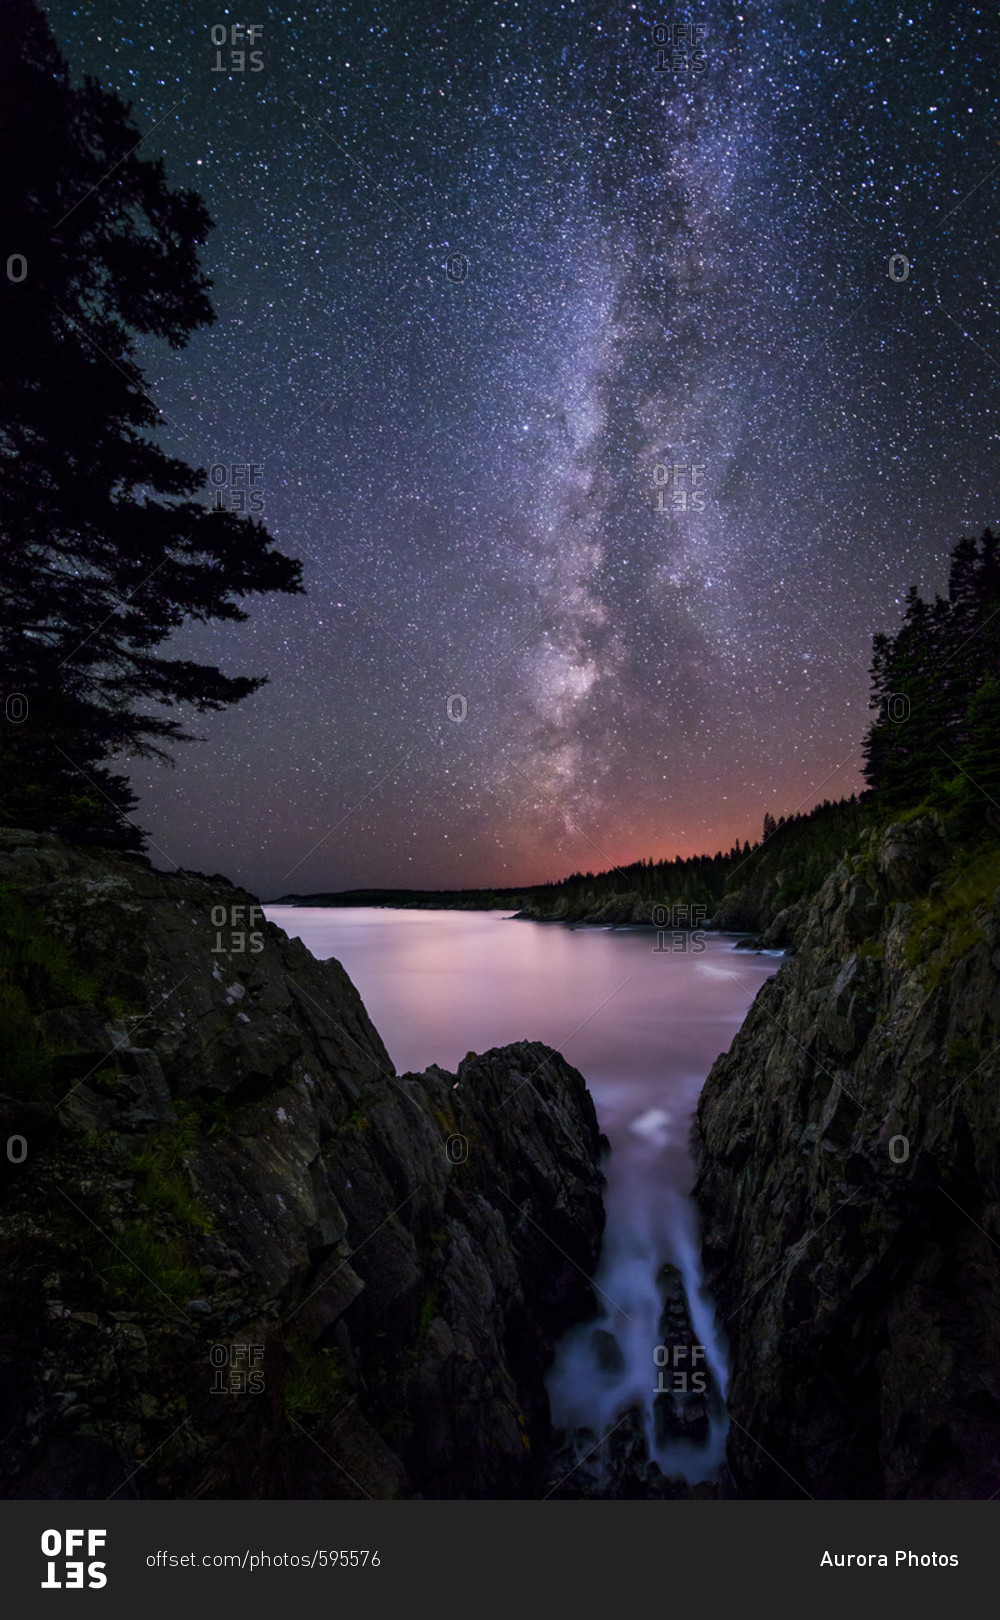 The Milky Way from the dramatic cliffs in Cutler, Maine, with the red glow of the tall antenna tower array at Cutler Naval Base in the background.